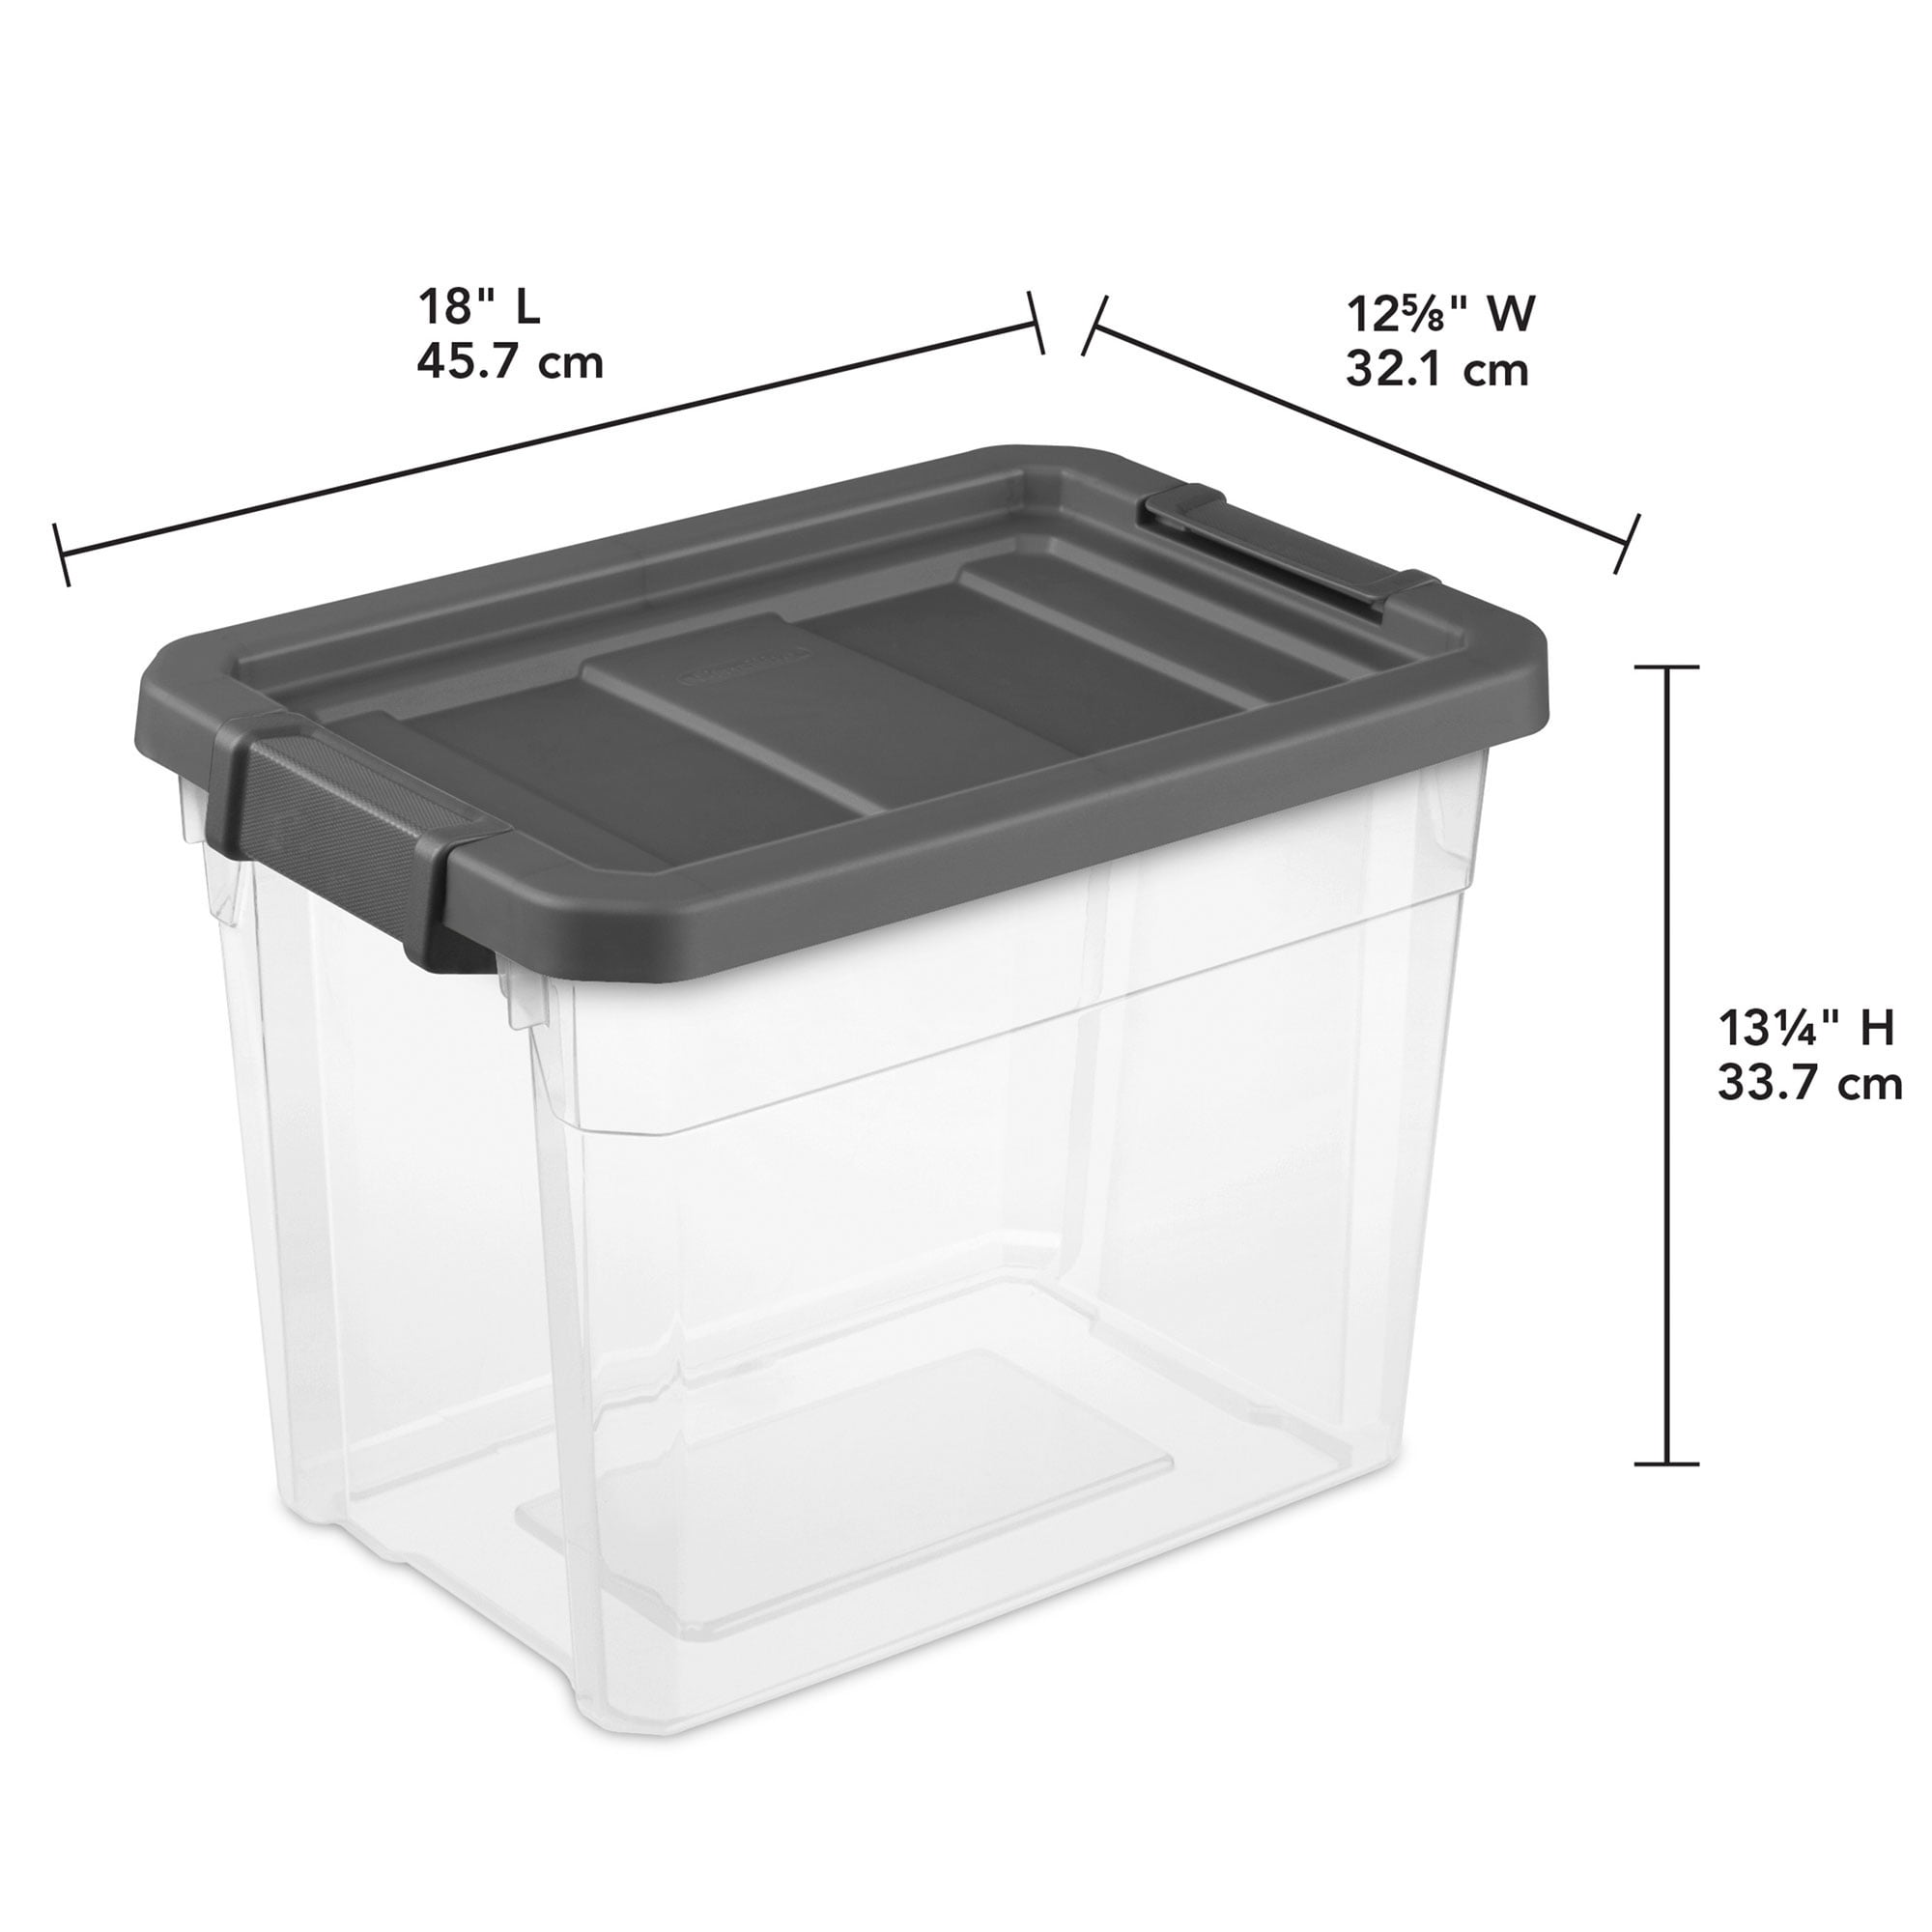 Discounted price Rinboat 30 Quart Clear Storage Latch Bins, Large Plastic  Storage Box with Wheels, 4 Packs, large plastic containers 